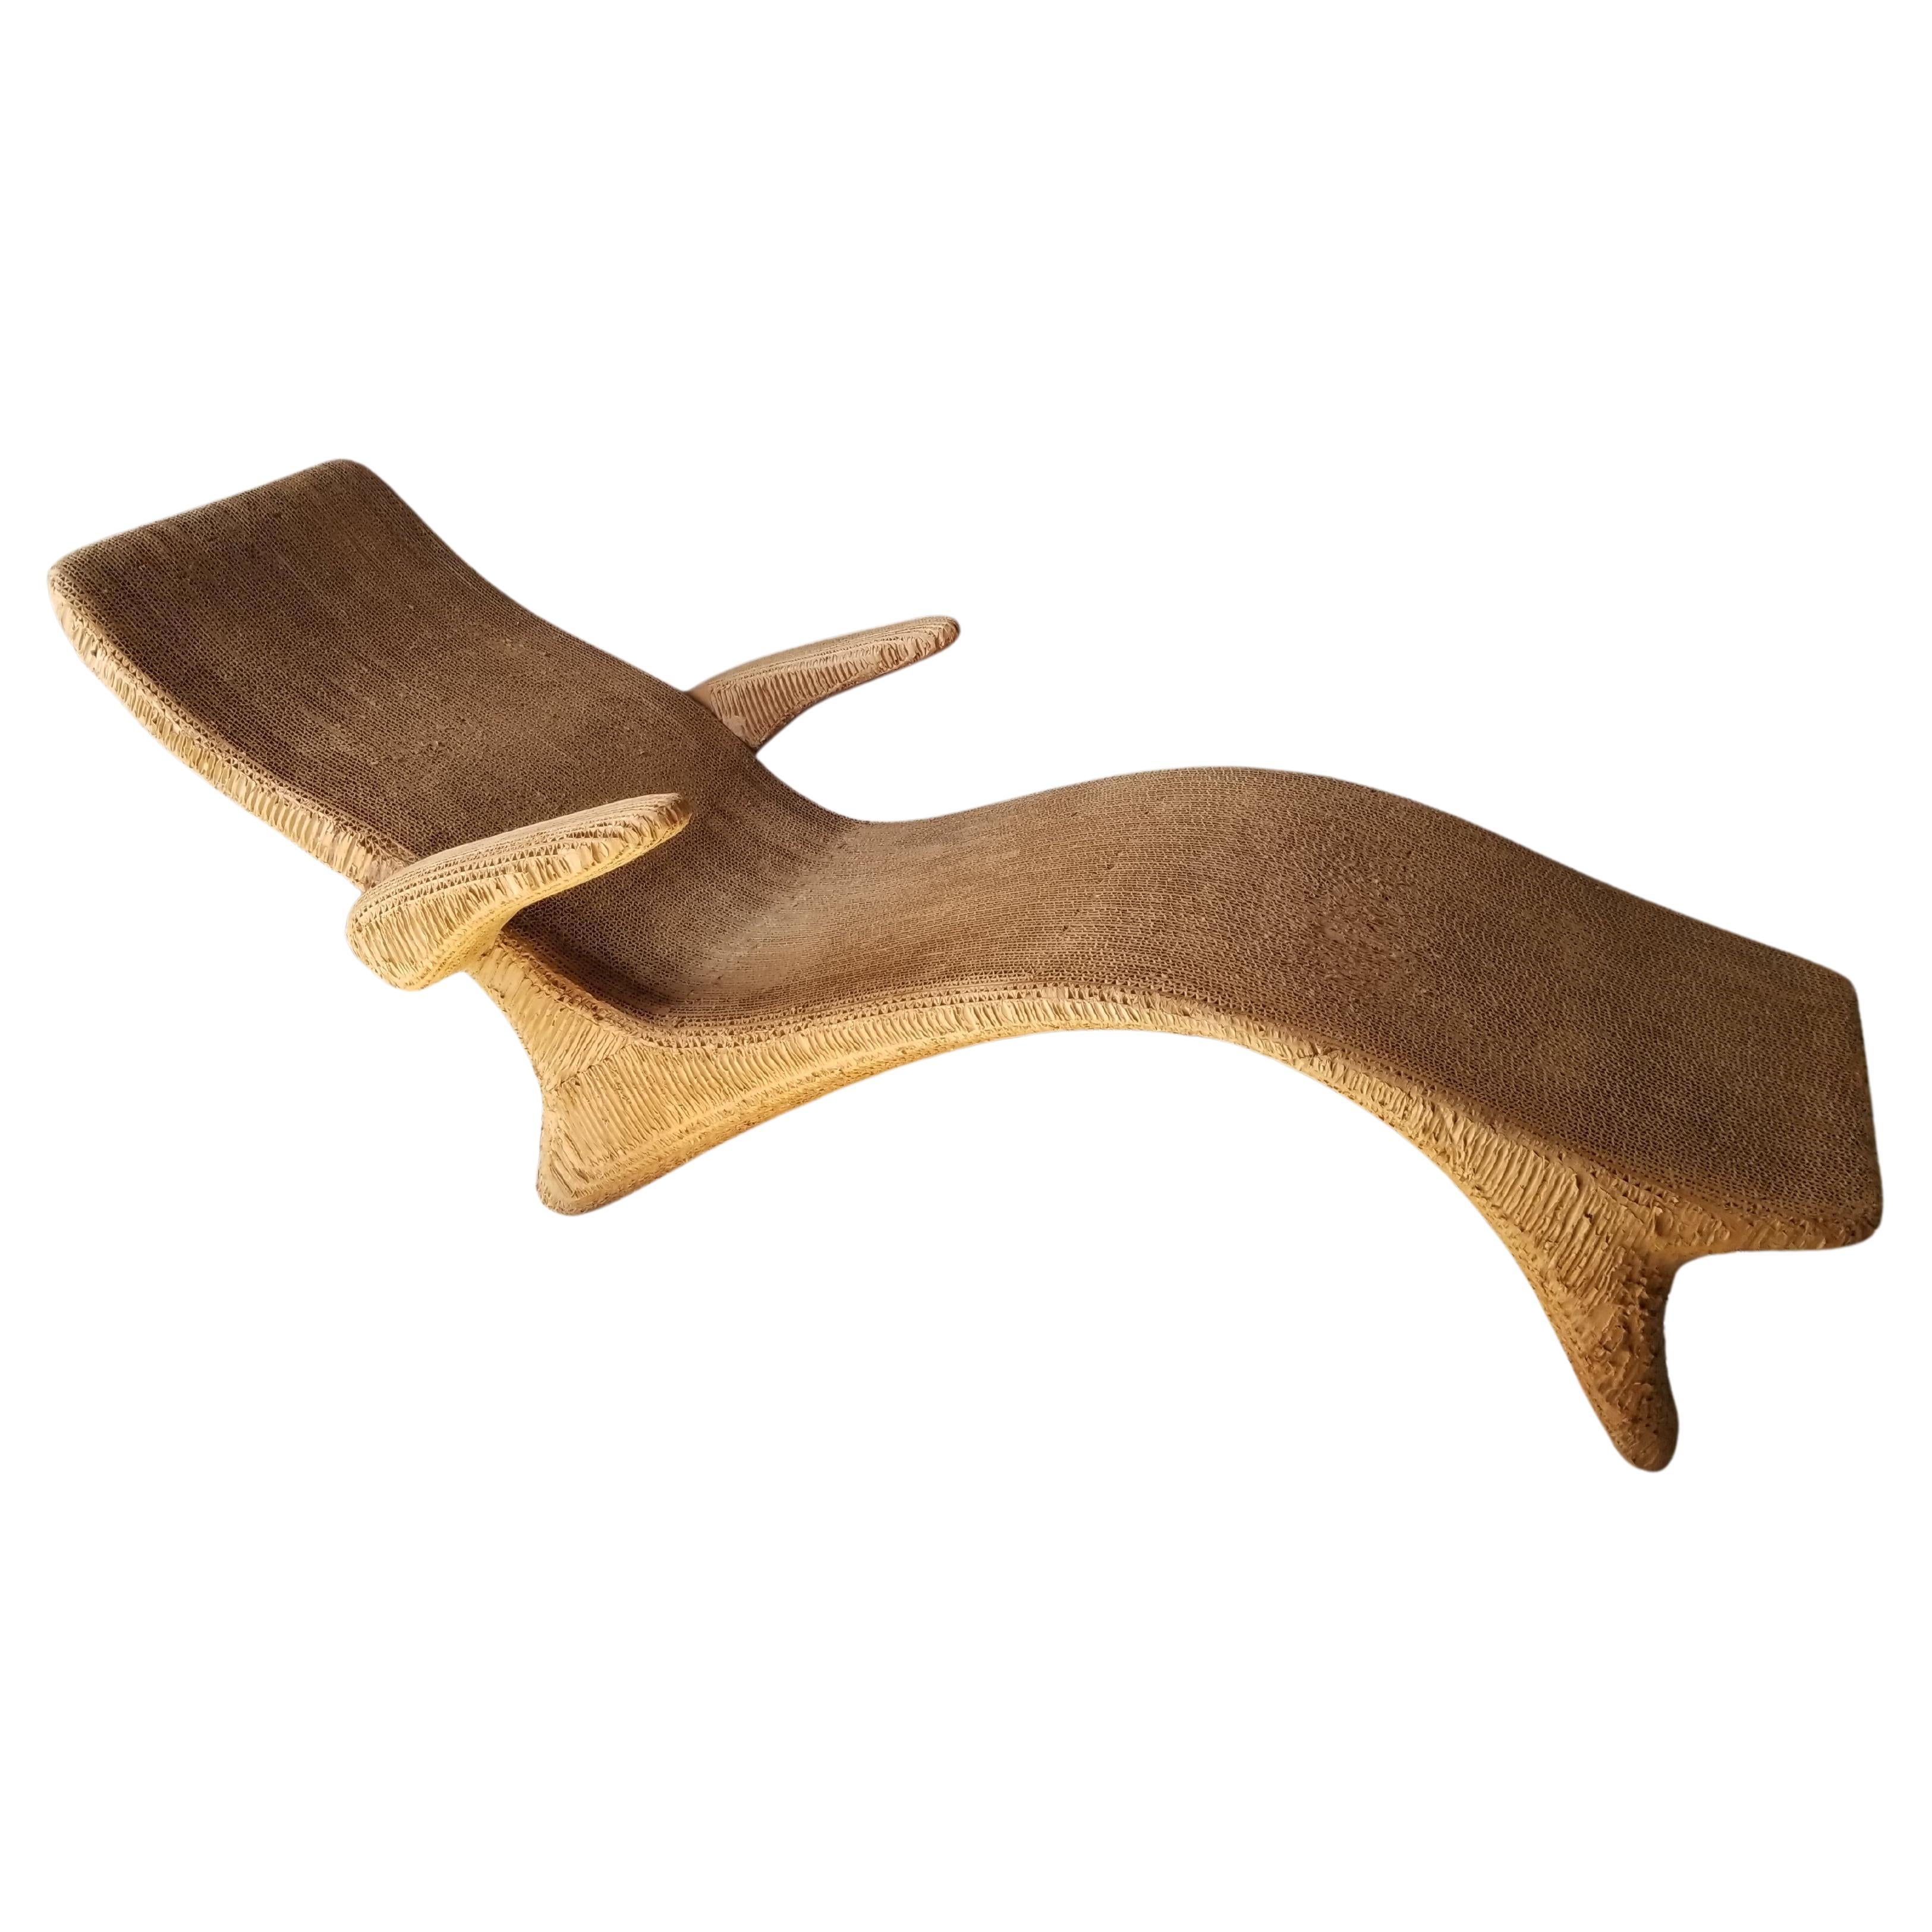 Chaise (Longue) Lounge Chair
Artistic Corrugated Cardboard Design Collectible Midcentury Modern Contoured Chaise Lounge Chair
Inspiration of Frank Gehry Studio Los Angeles
Completely functional as well as an artistic standout.
Piece is from studio